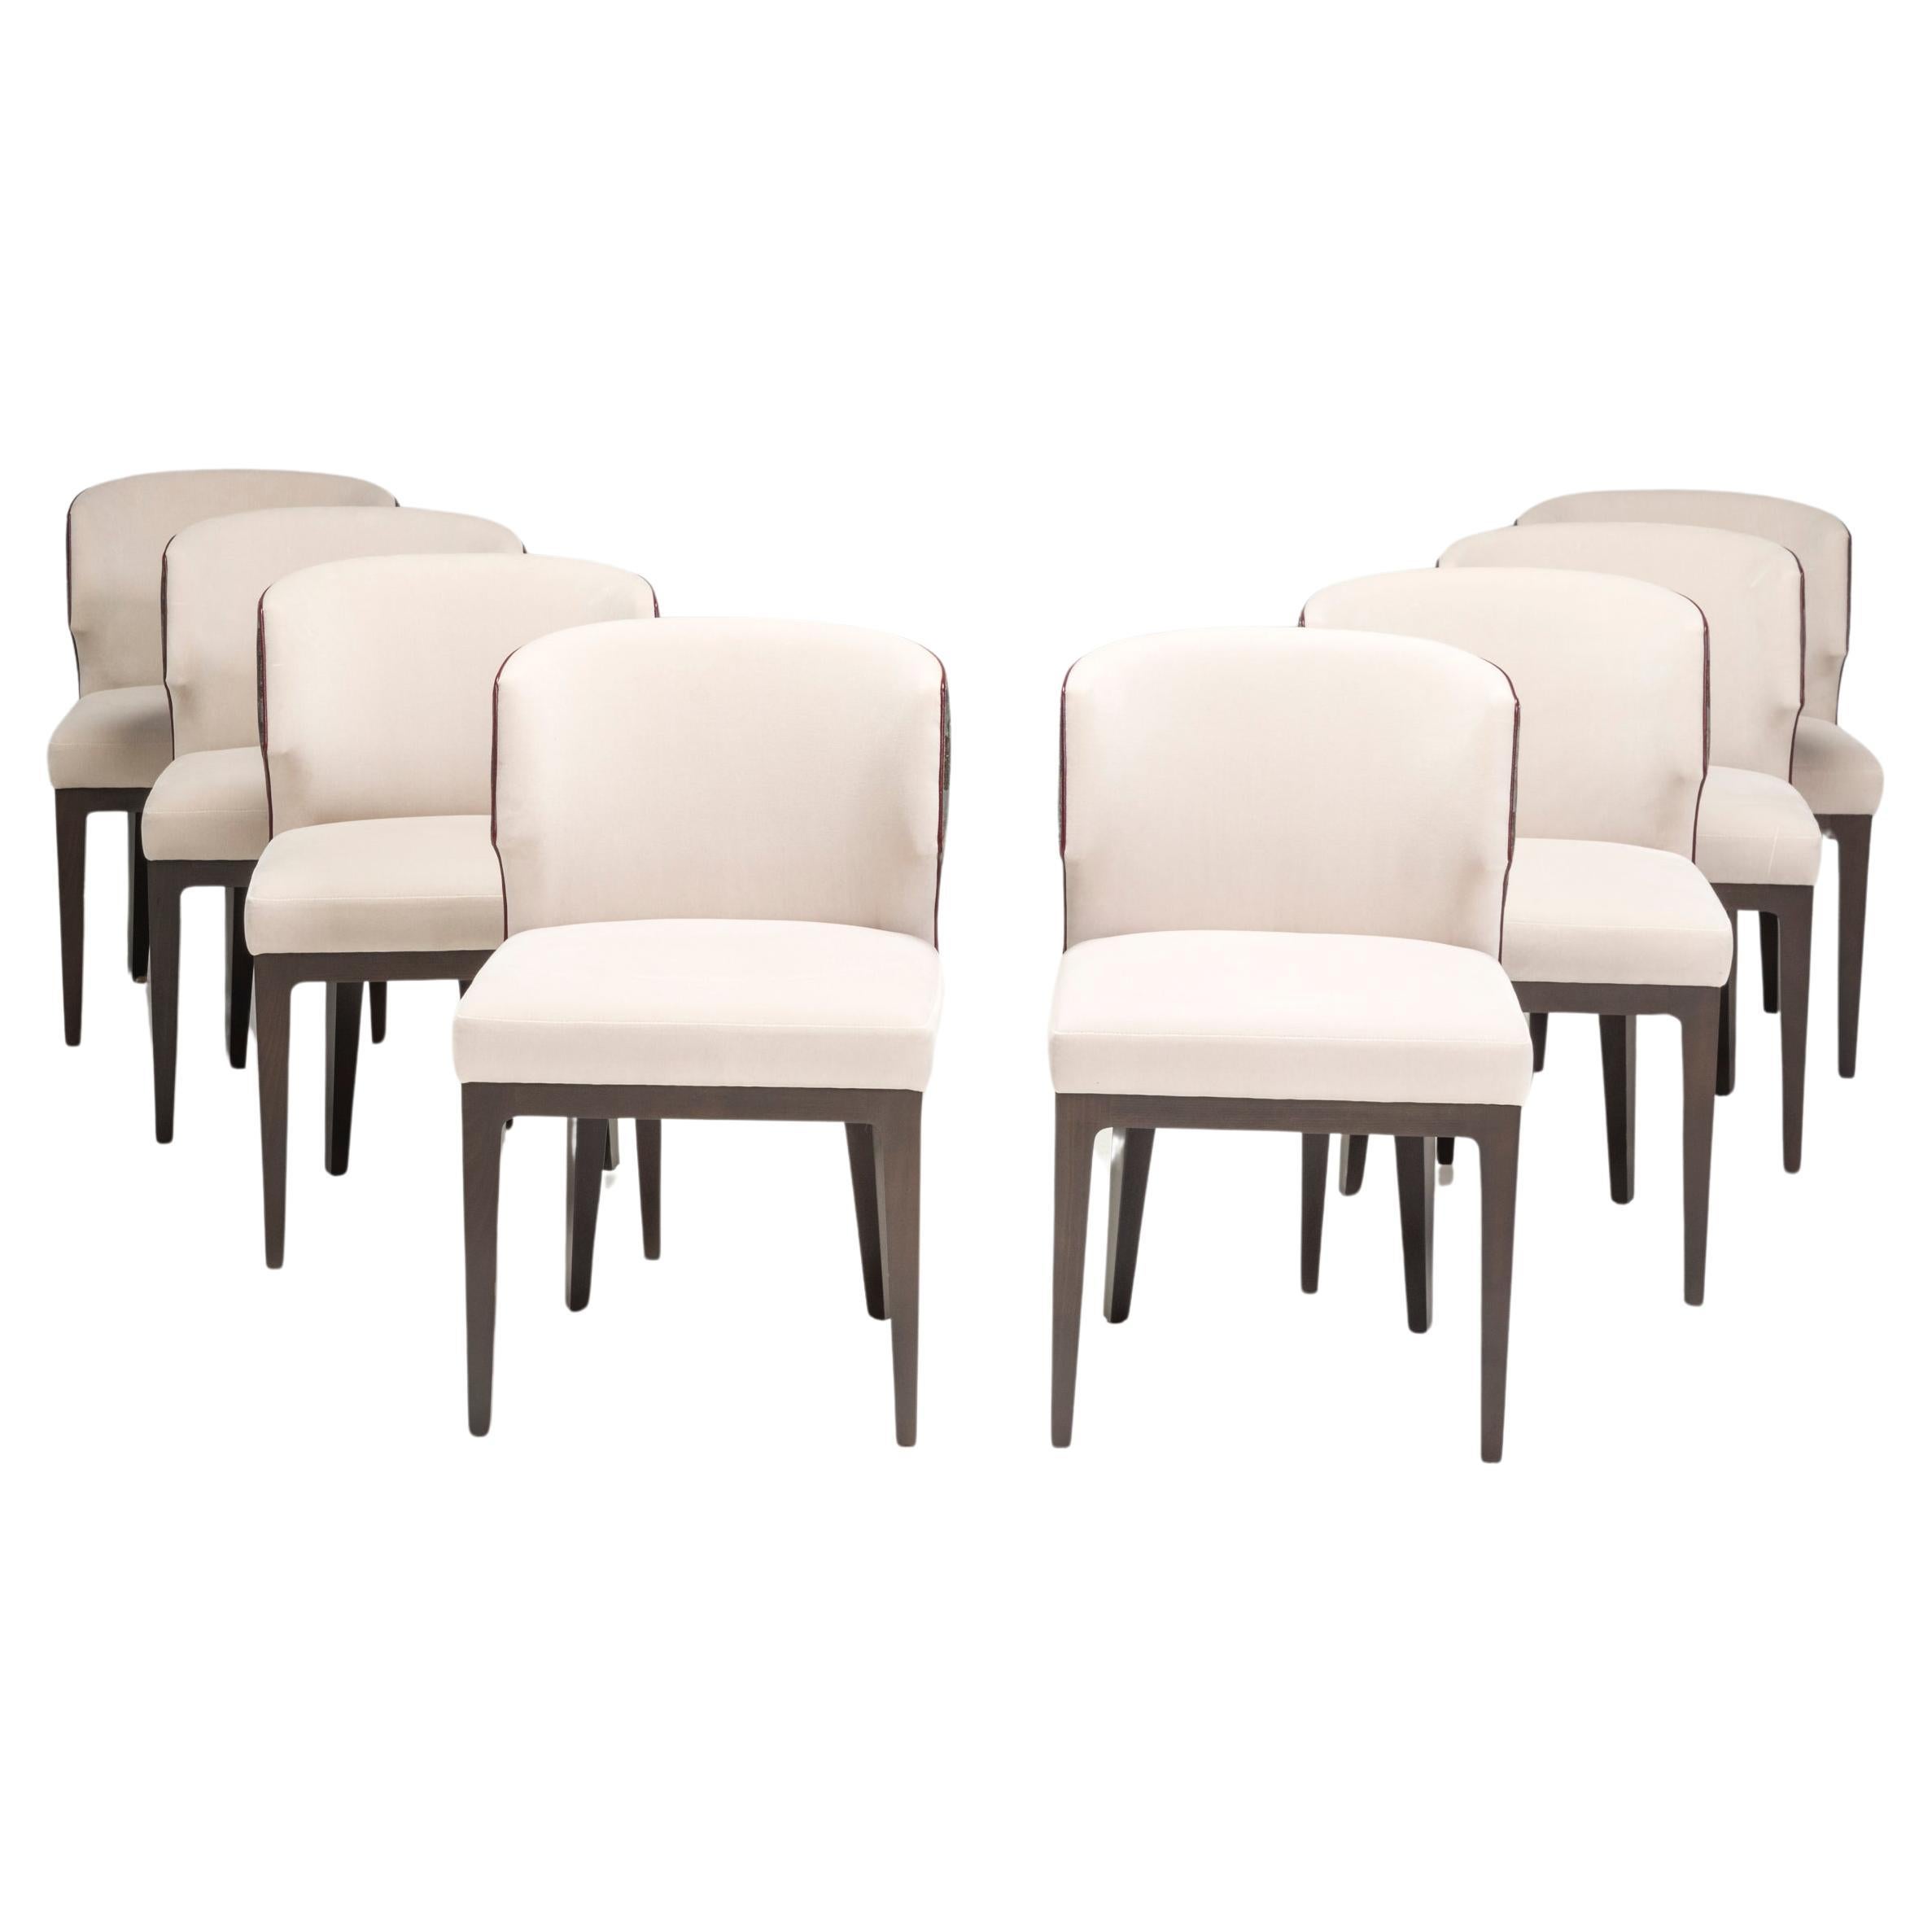 Lasalle by Dennis Miller Dining Chairs in Bespoke Patterned Fabric, Set of 8  For Sale